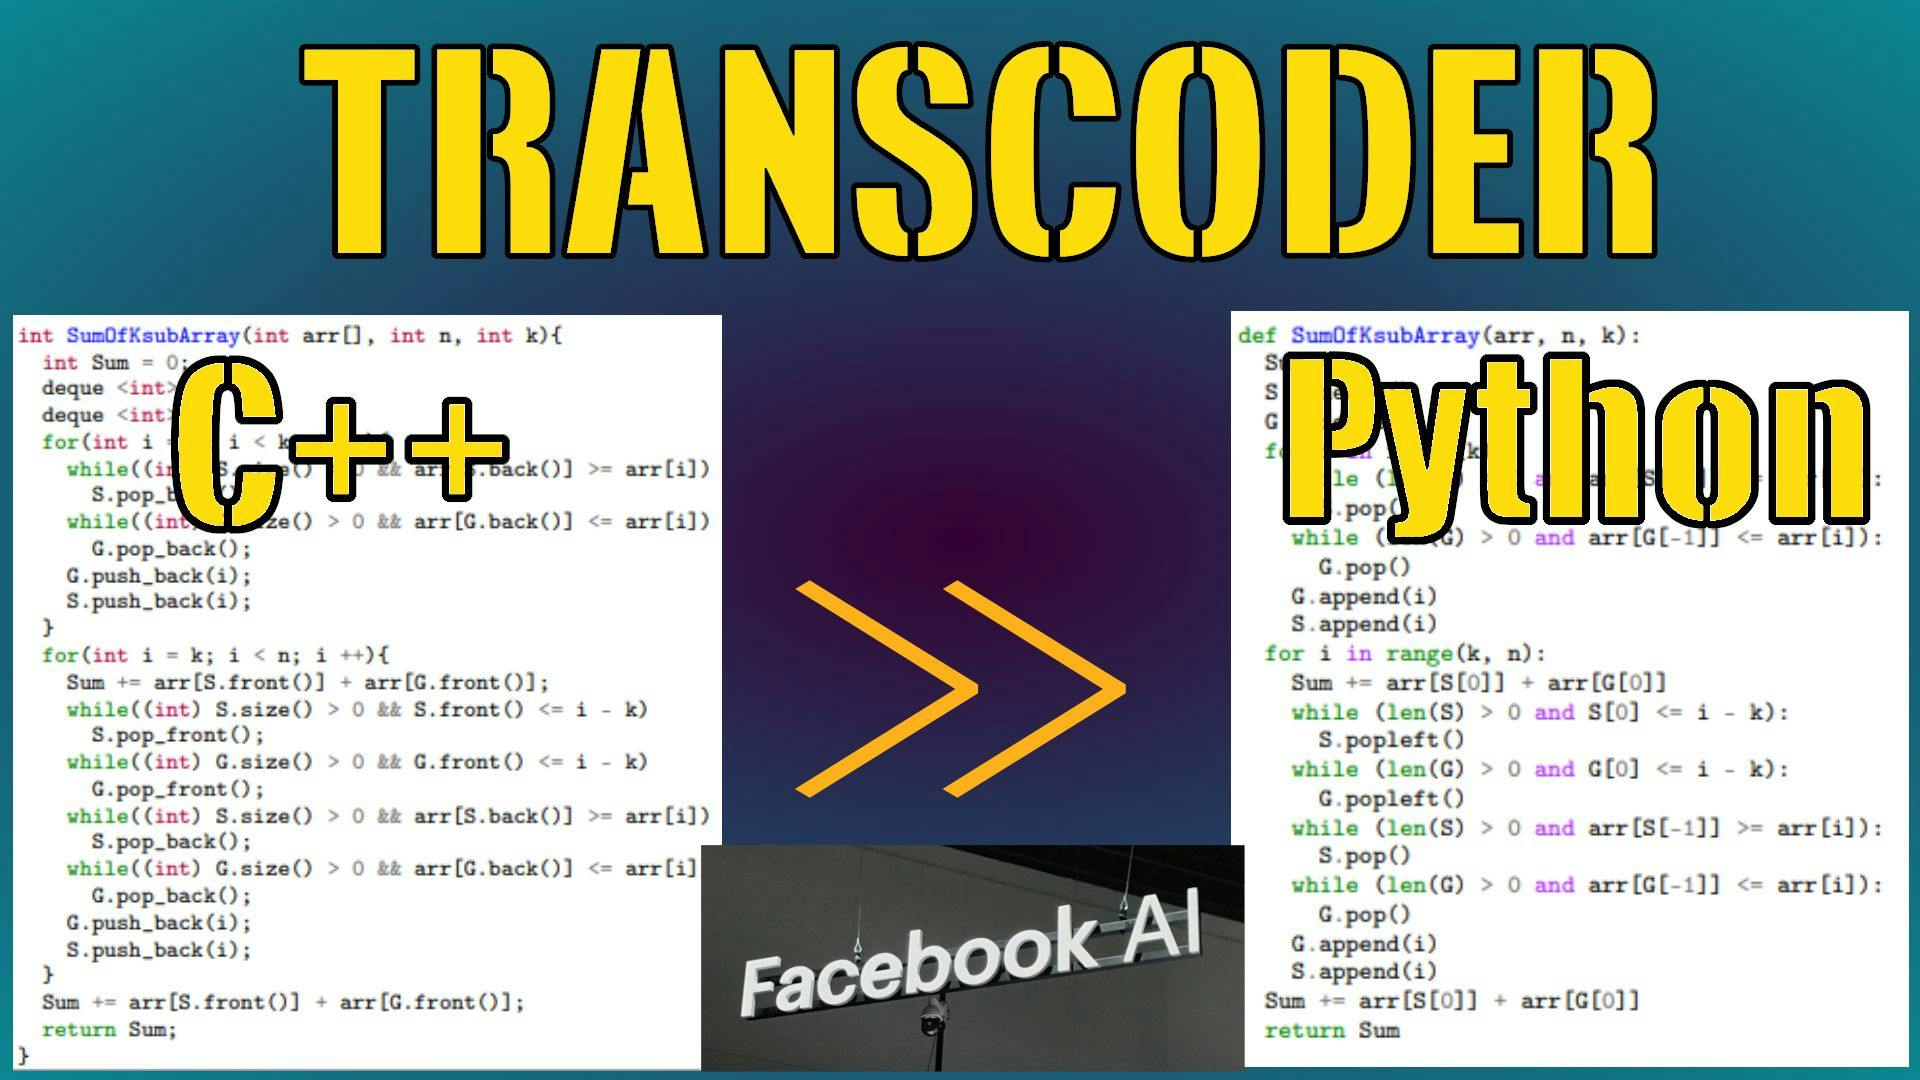 /the-facebook-transcoder-explained-converting-coding-languages-with-ai-9729330y feature image